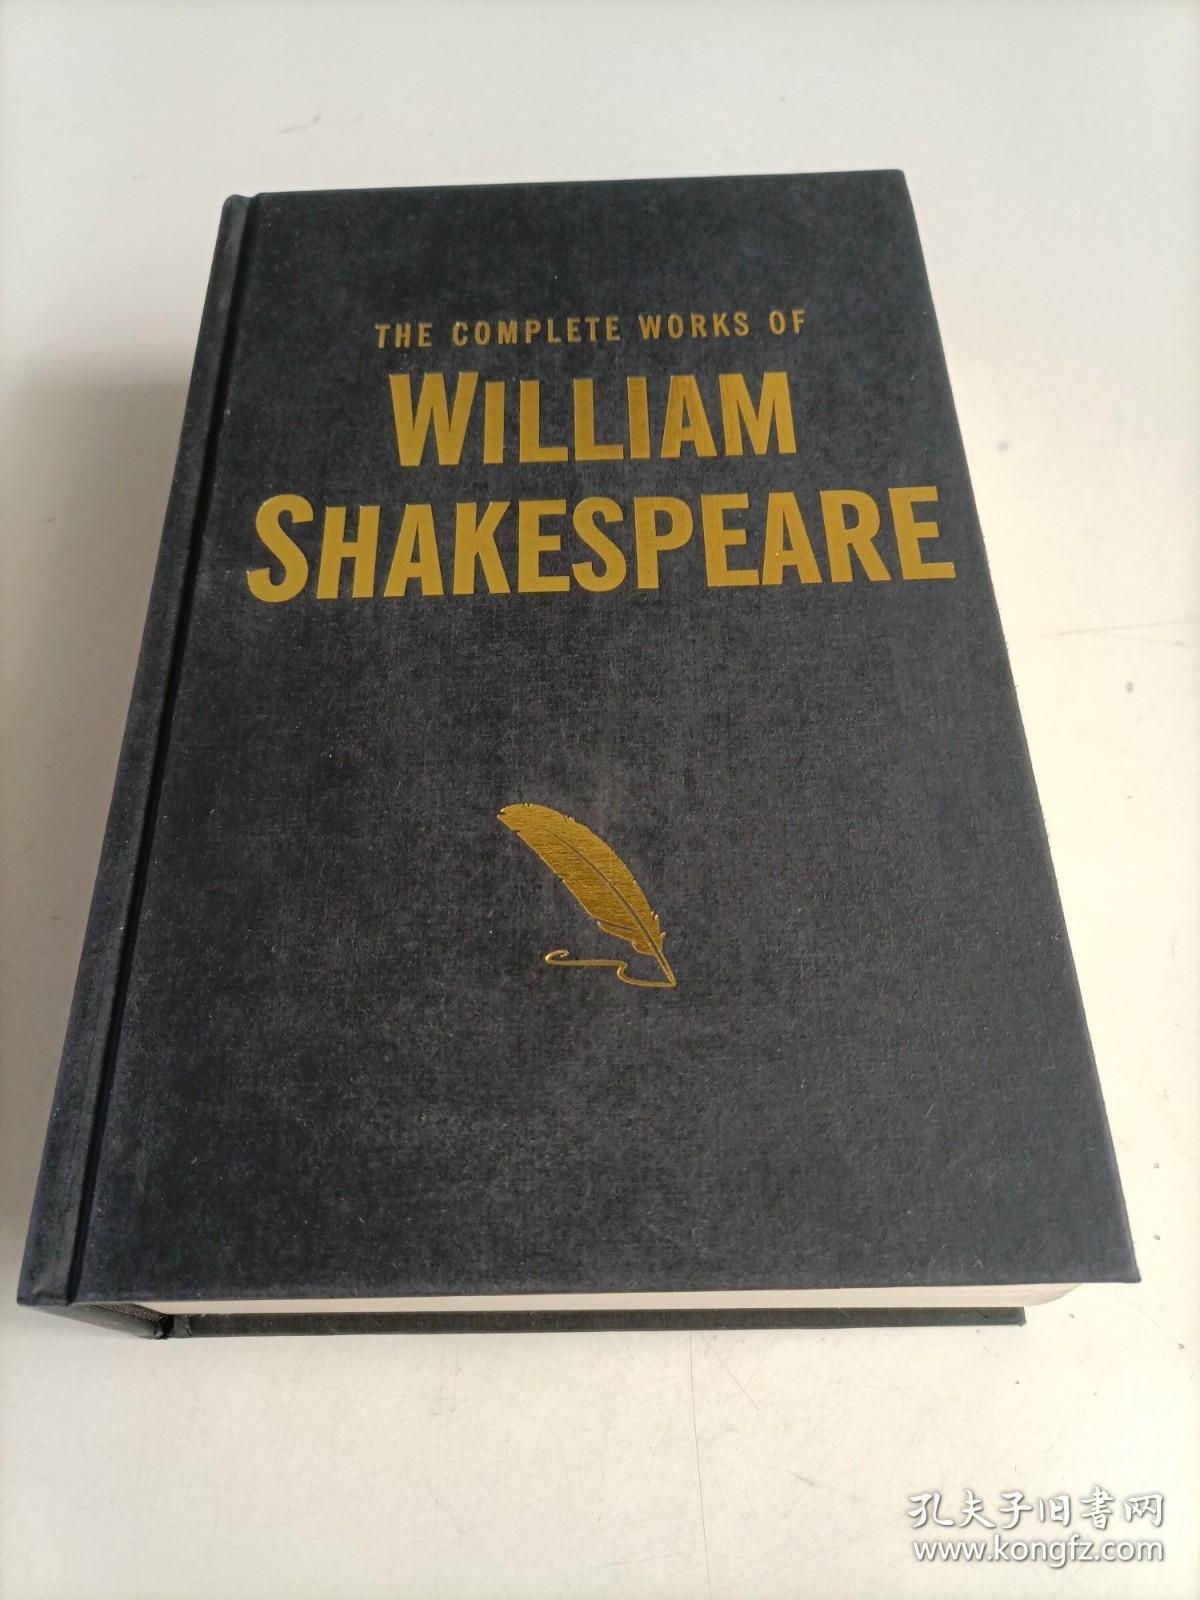 The Complete Works of William Shakespeare（莎士比亚全集）精装本